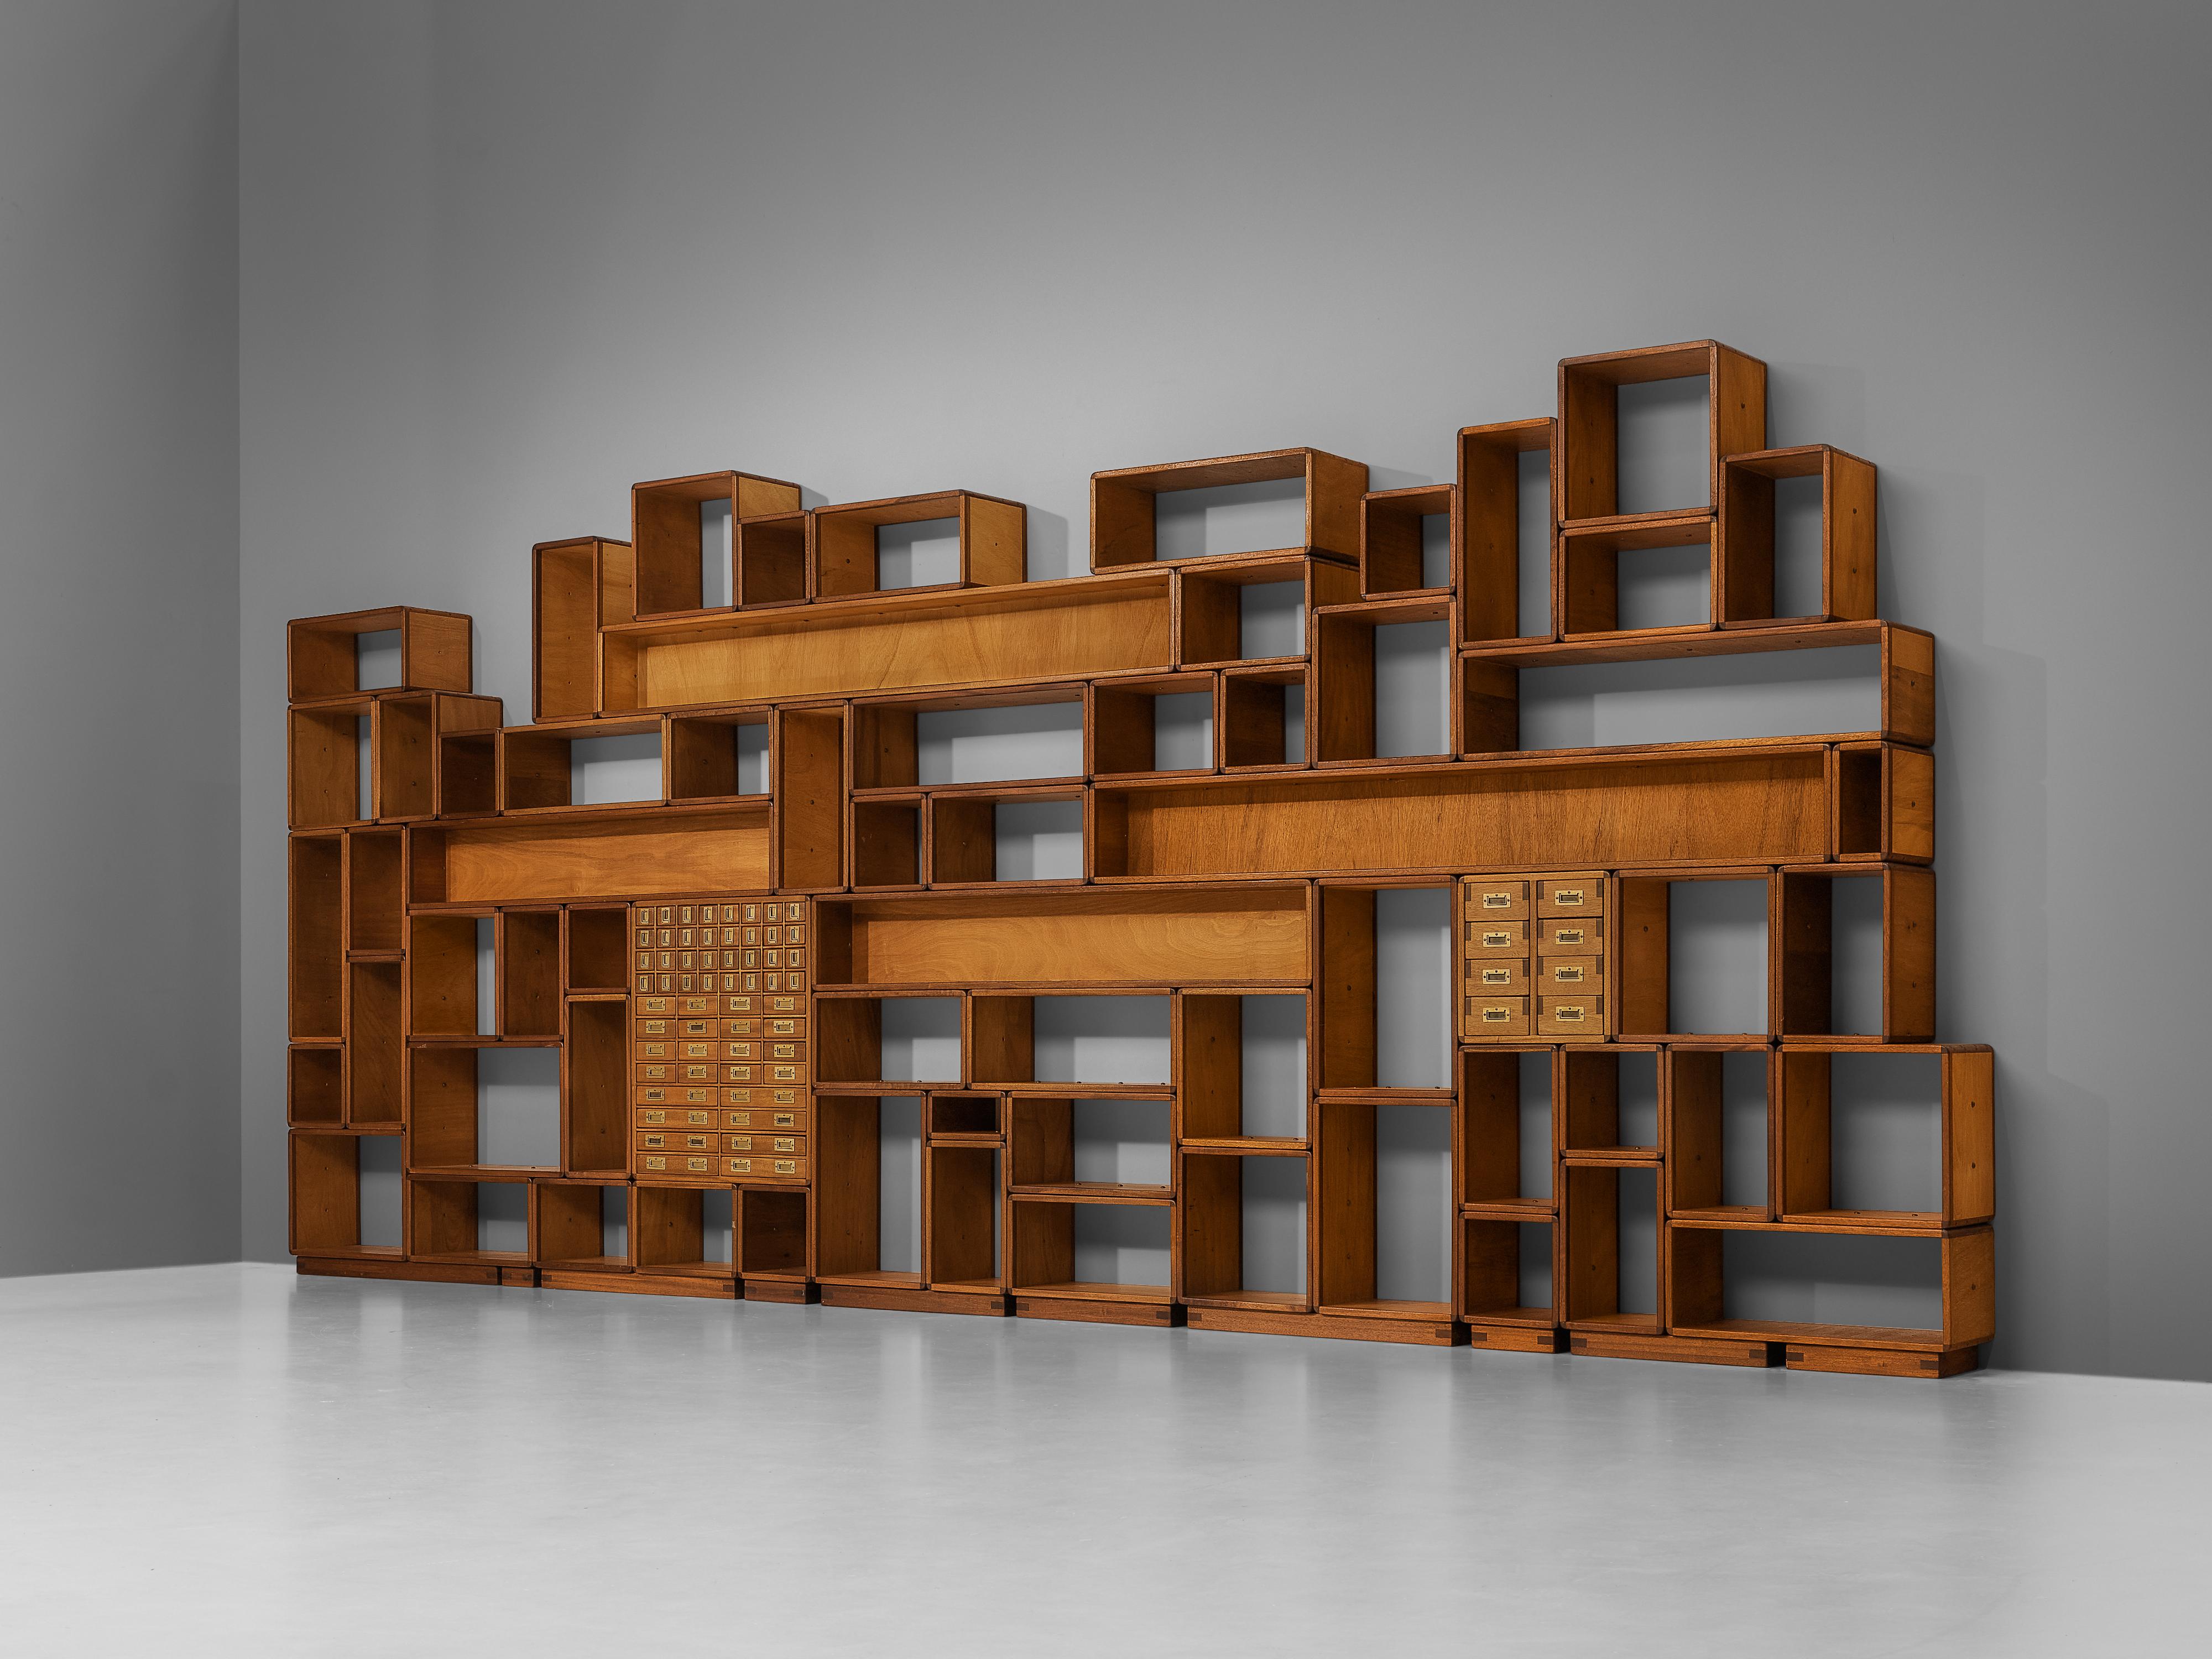 Modular wall unit, teak, mahogany, brass, Germany, 1970s

Grand adjustable, open wall unit in teak and mahogany. Due to the large number of elements and endless possibilities to arrange them, this piece can function as a room divider or a wall